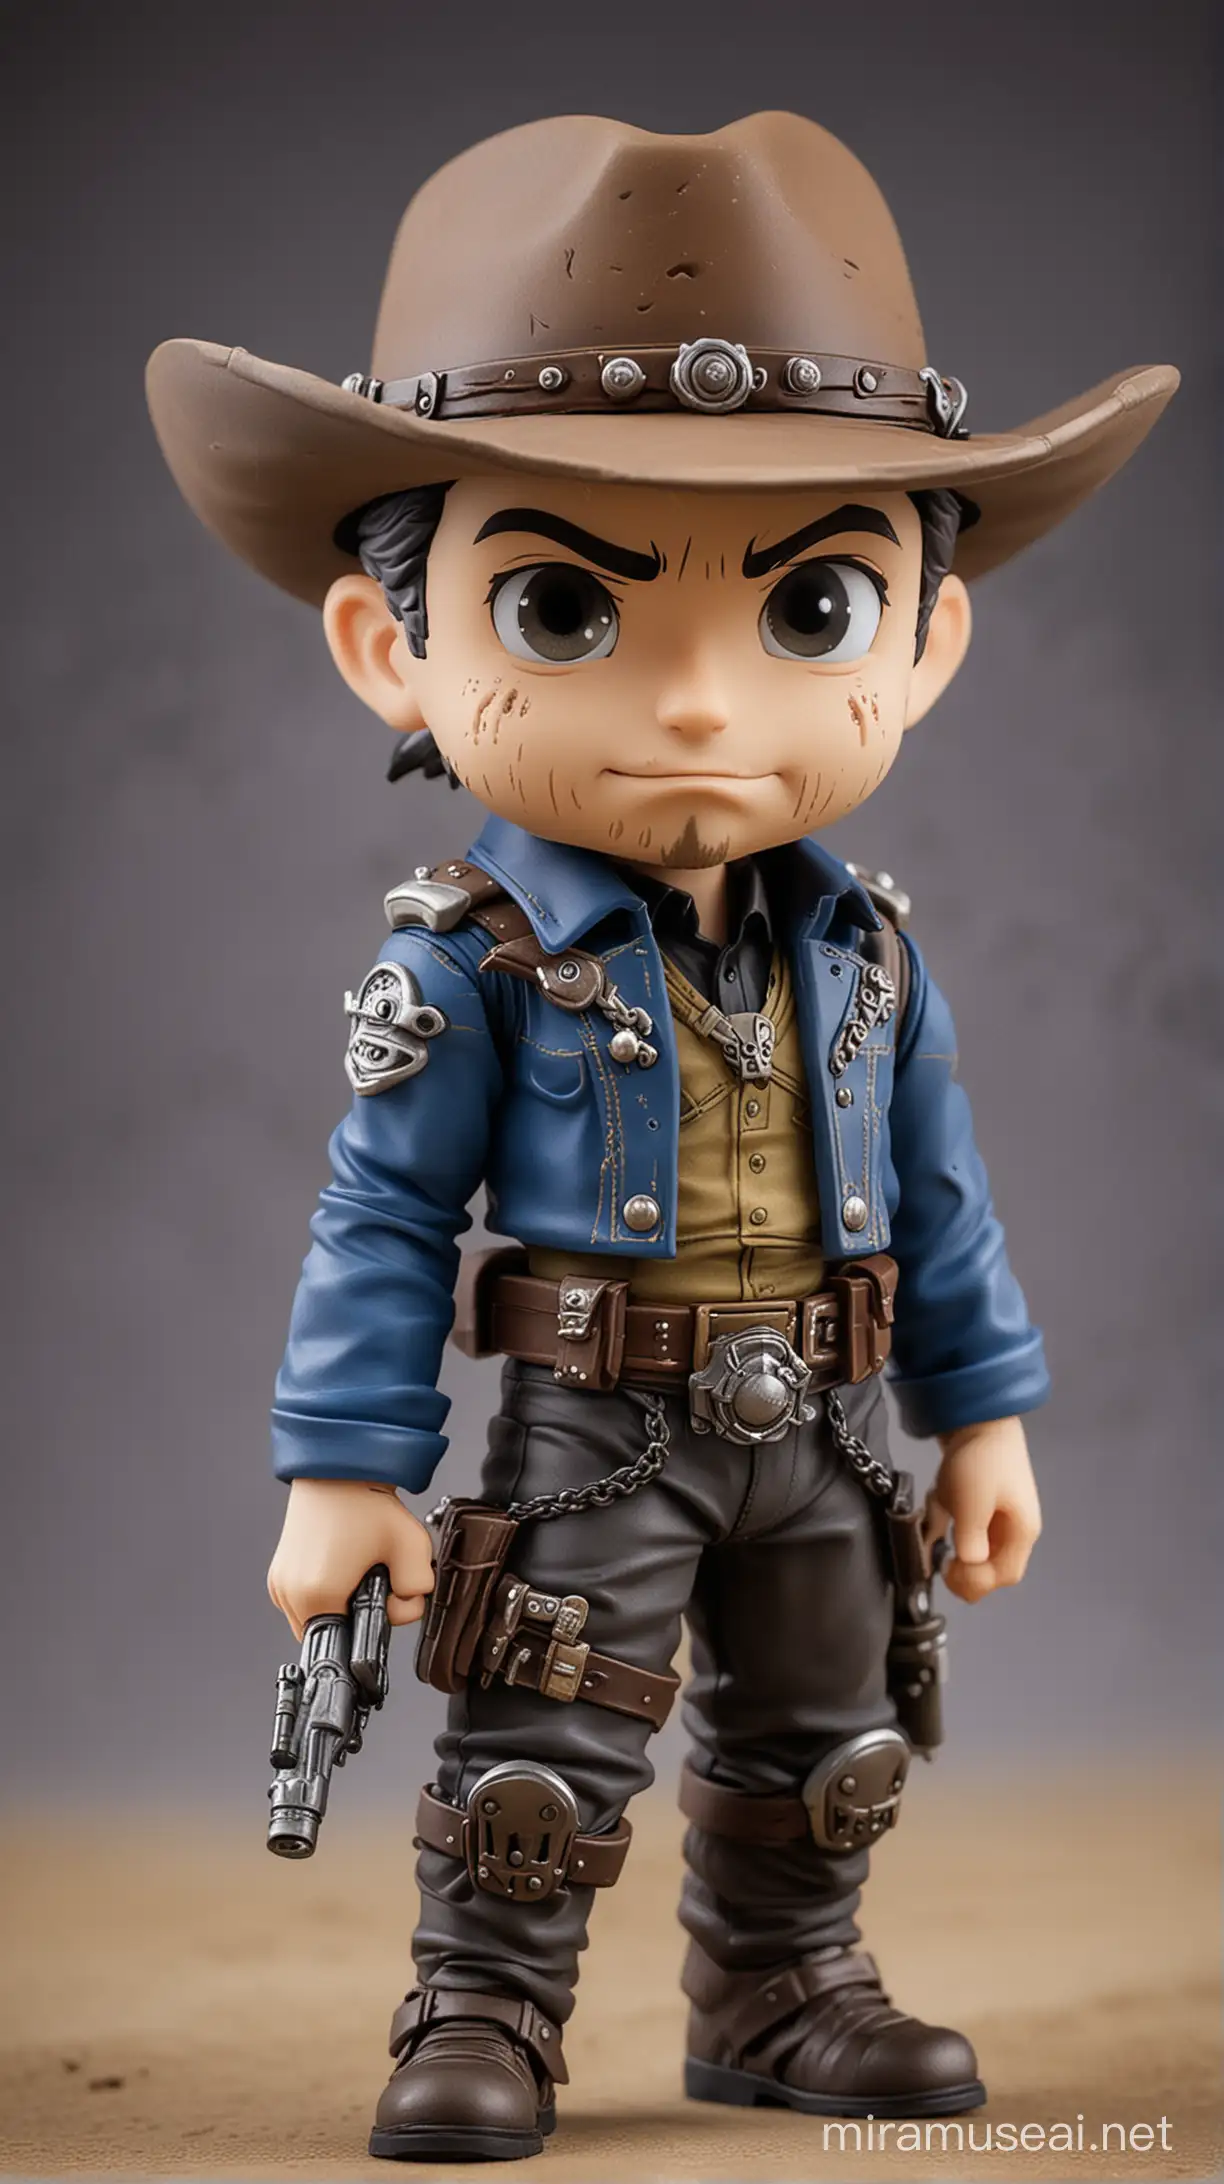 create a chibi Nendoroid version of the necrotic cowboy from the prime video tv series (fallout)